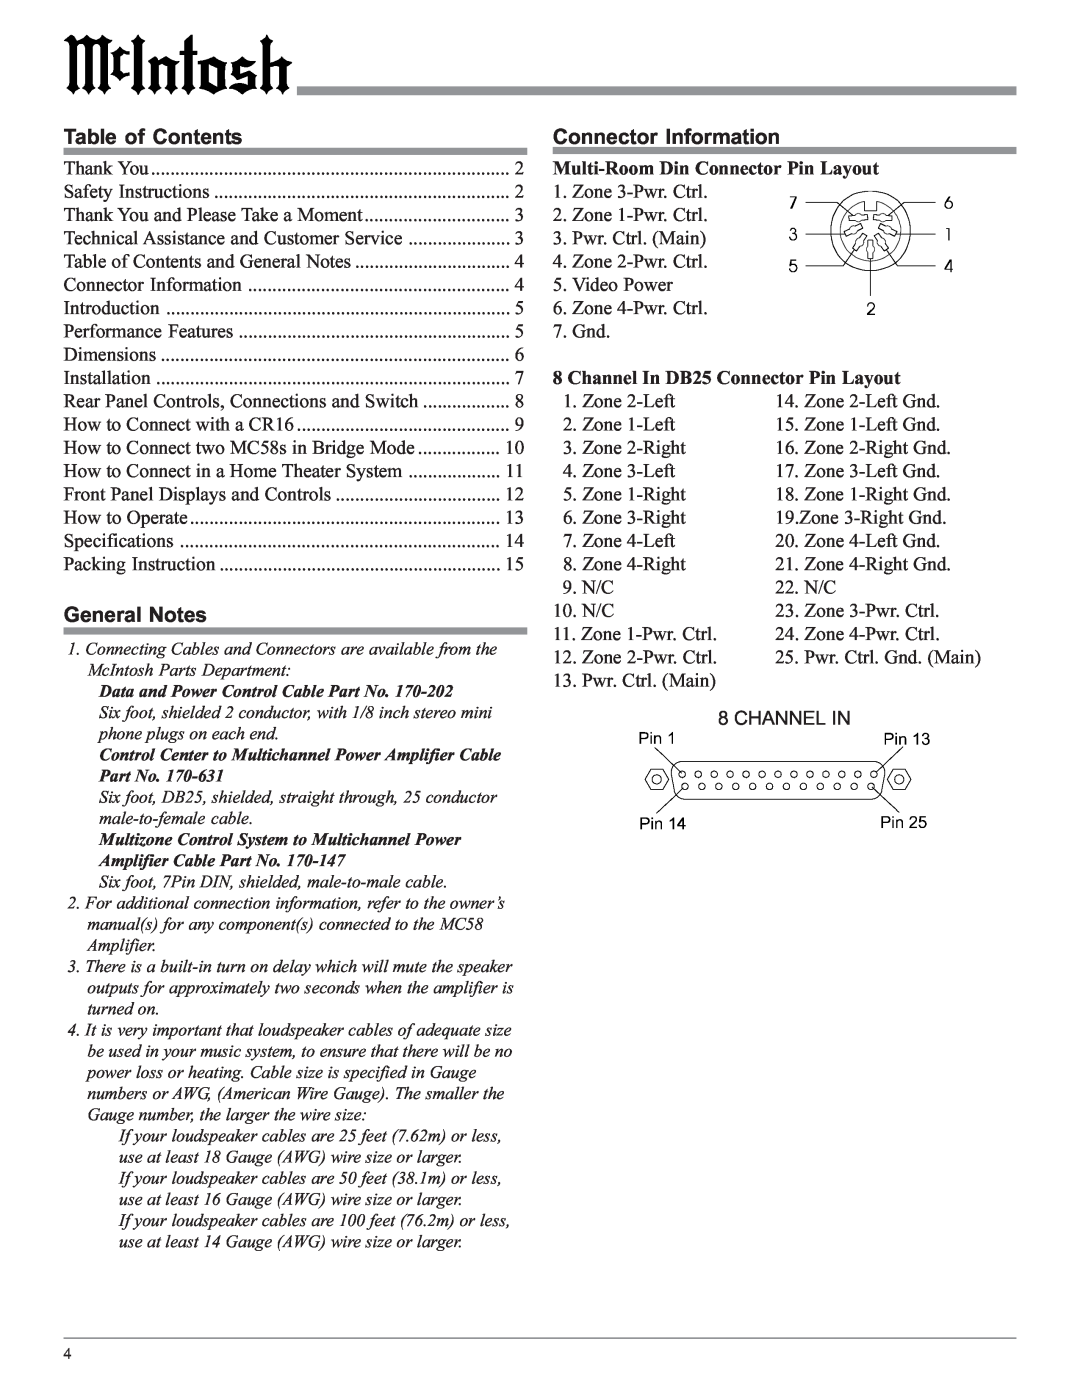 McIntosh MC58 owner manual Table of Contents, General Notes, Connector Information, Channel In 